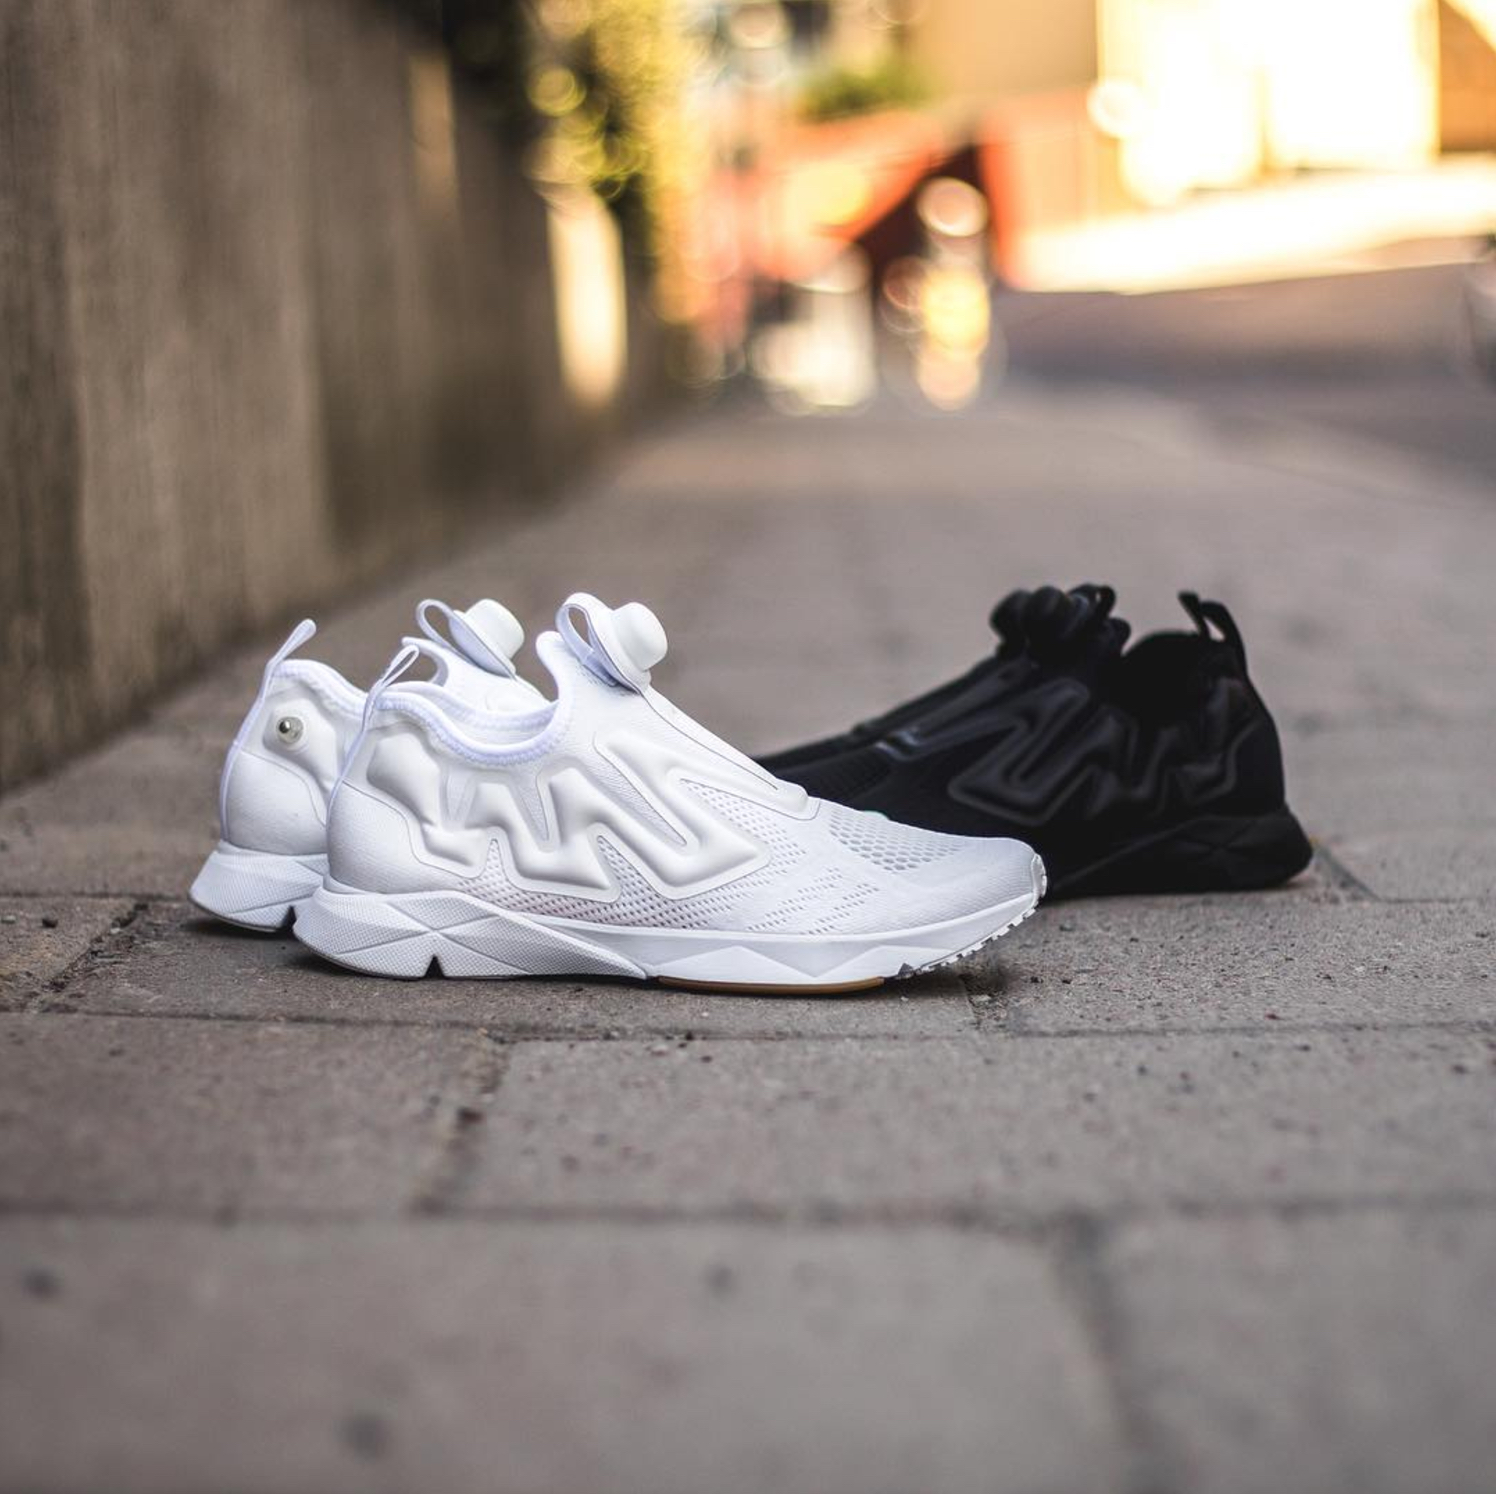 The Reebok Pump Supreme Goes Monochromatic and Gets Gum Hits - WearTesters